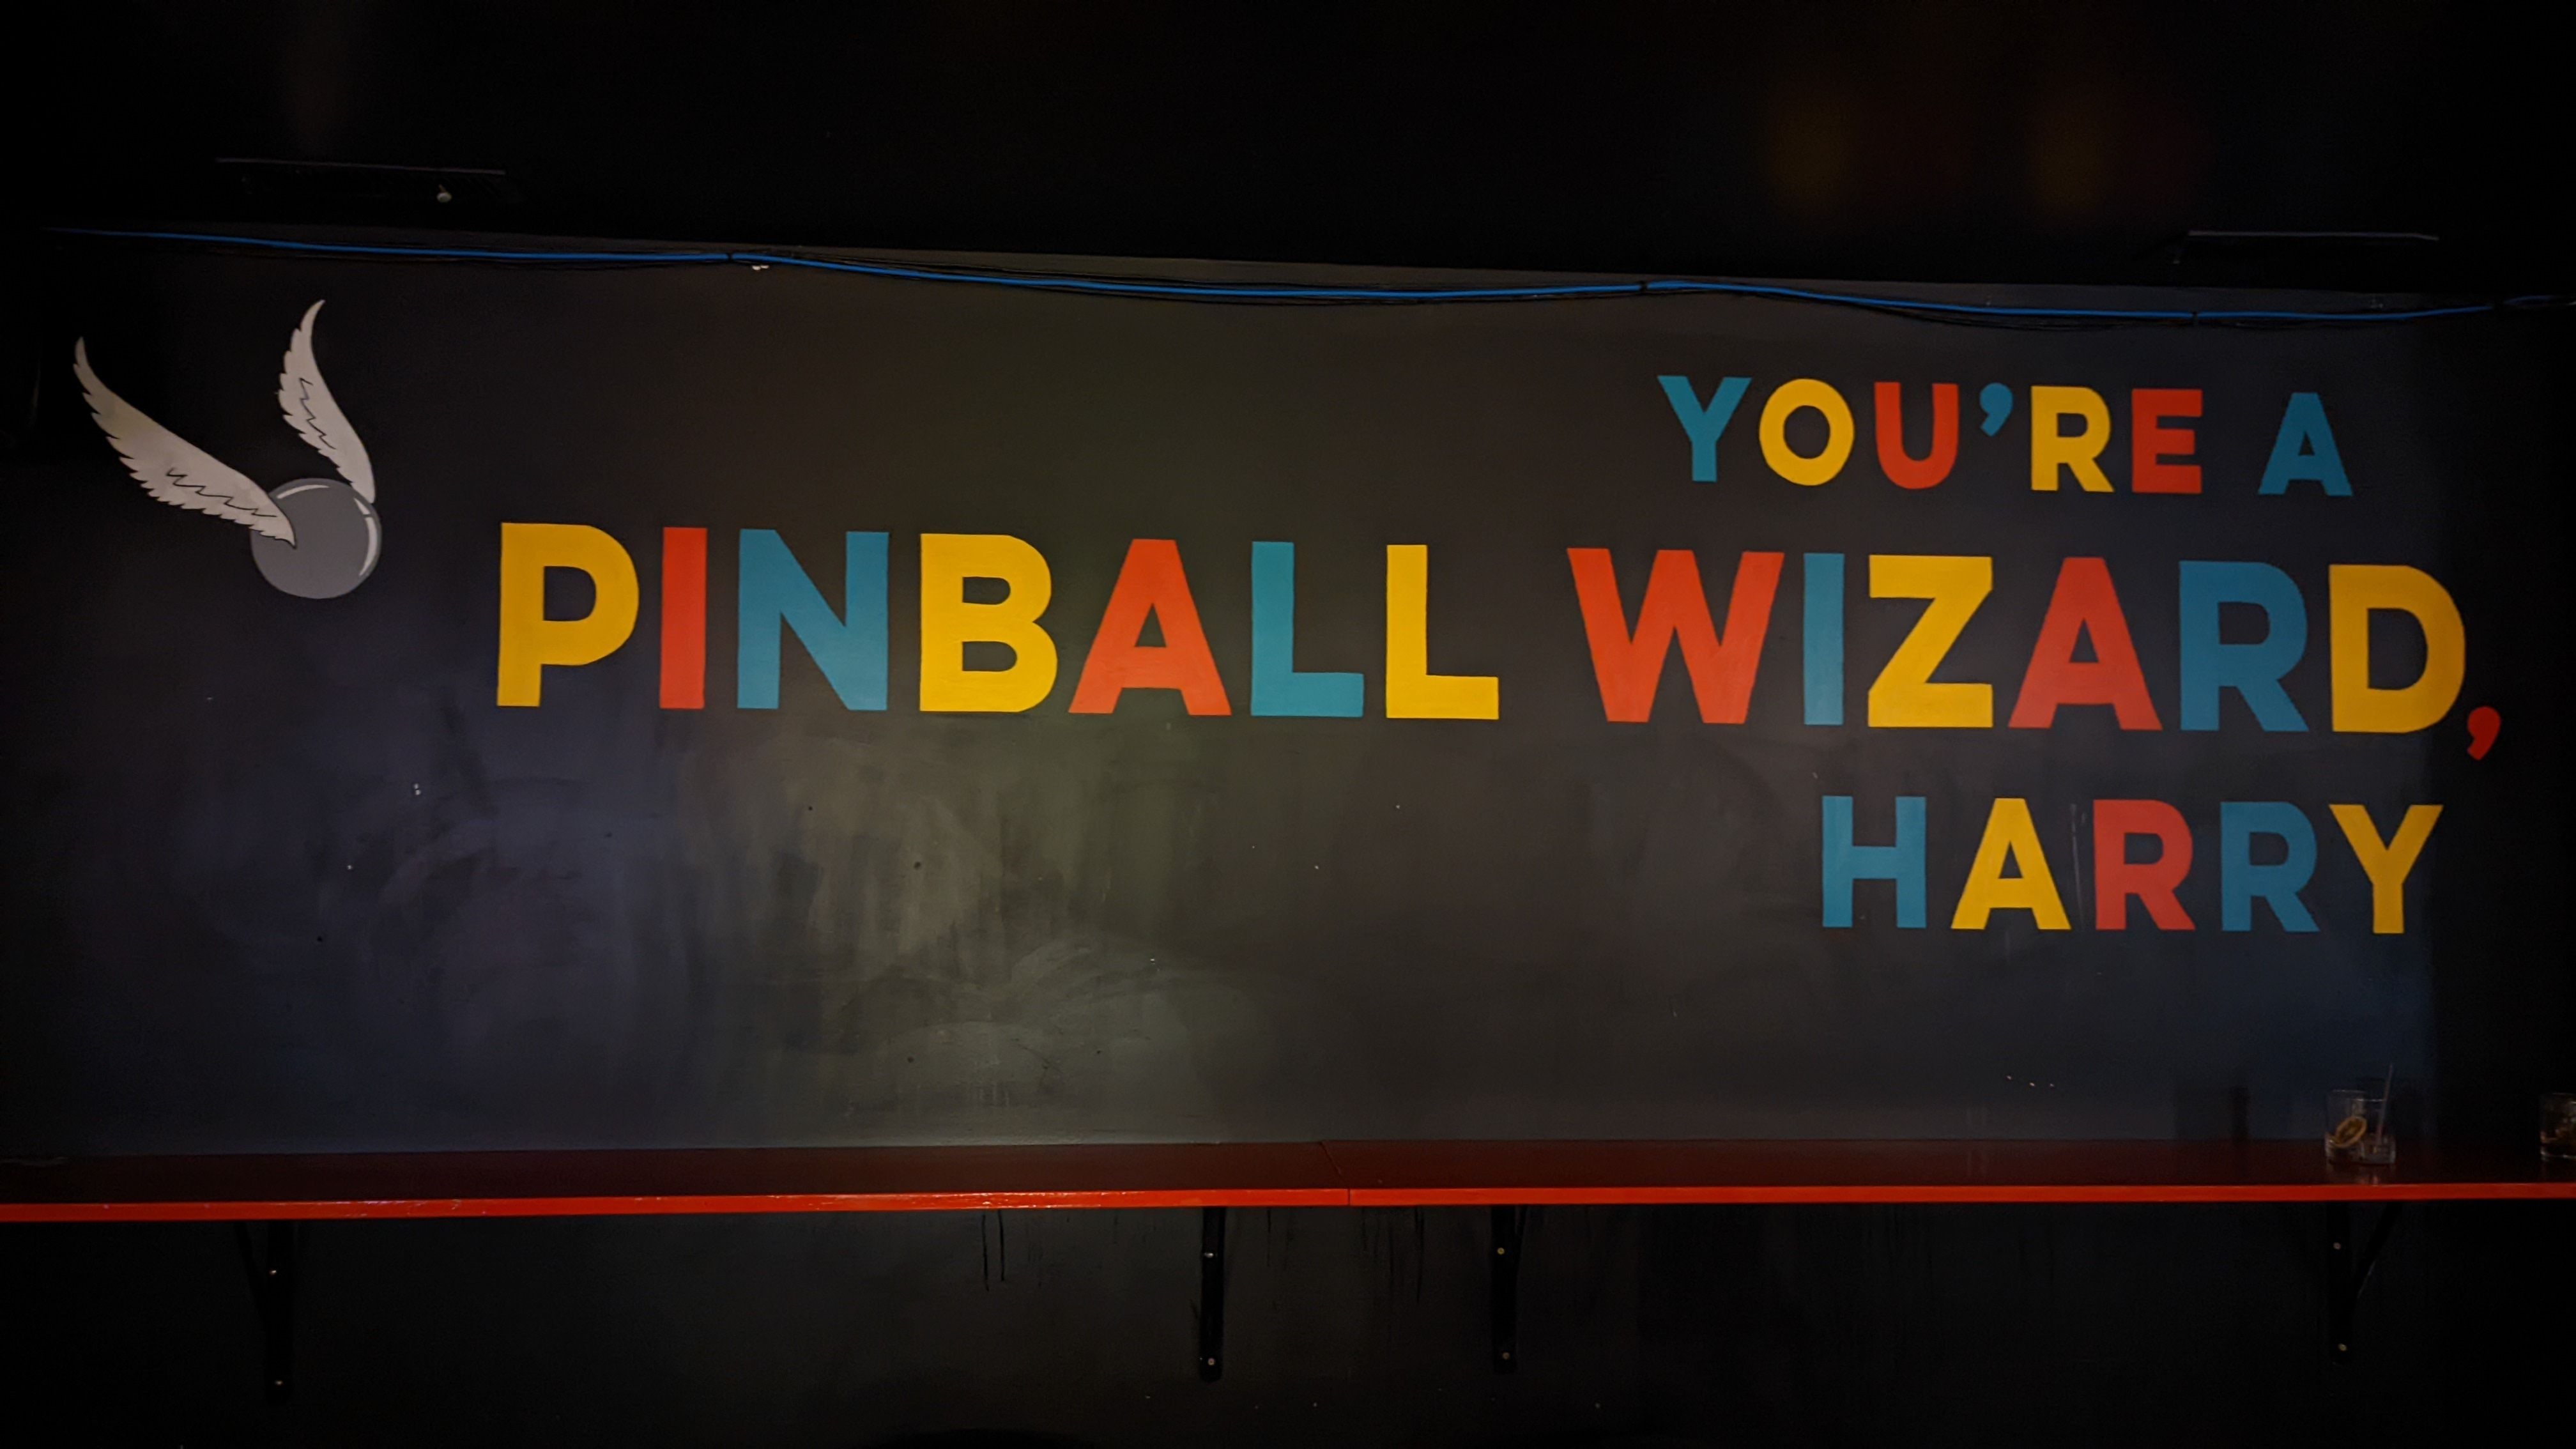 A sign says "You're a pinball wizard, Harry" in multi-colored letters, behind a shelf with a cocktail on it.